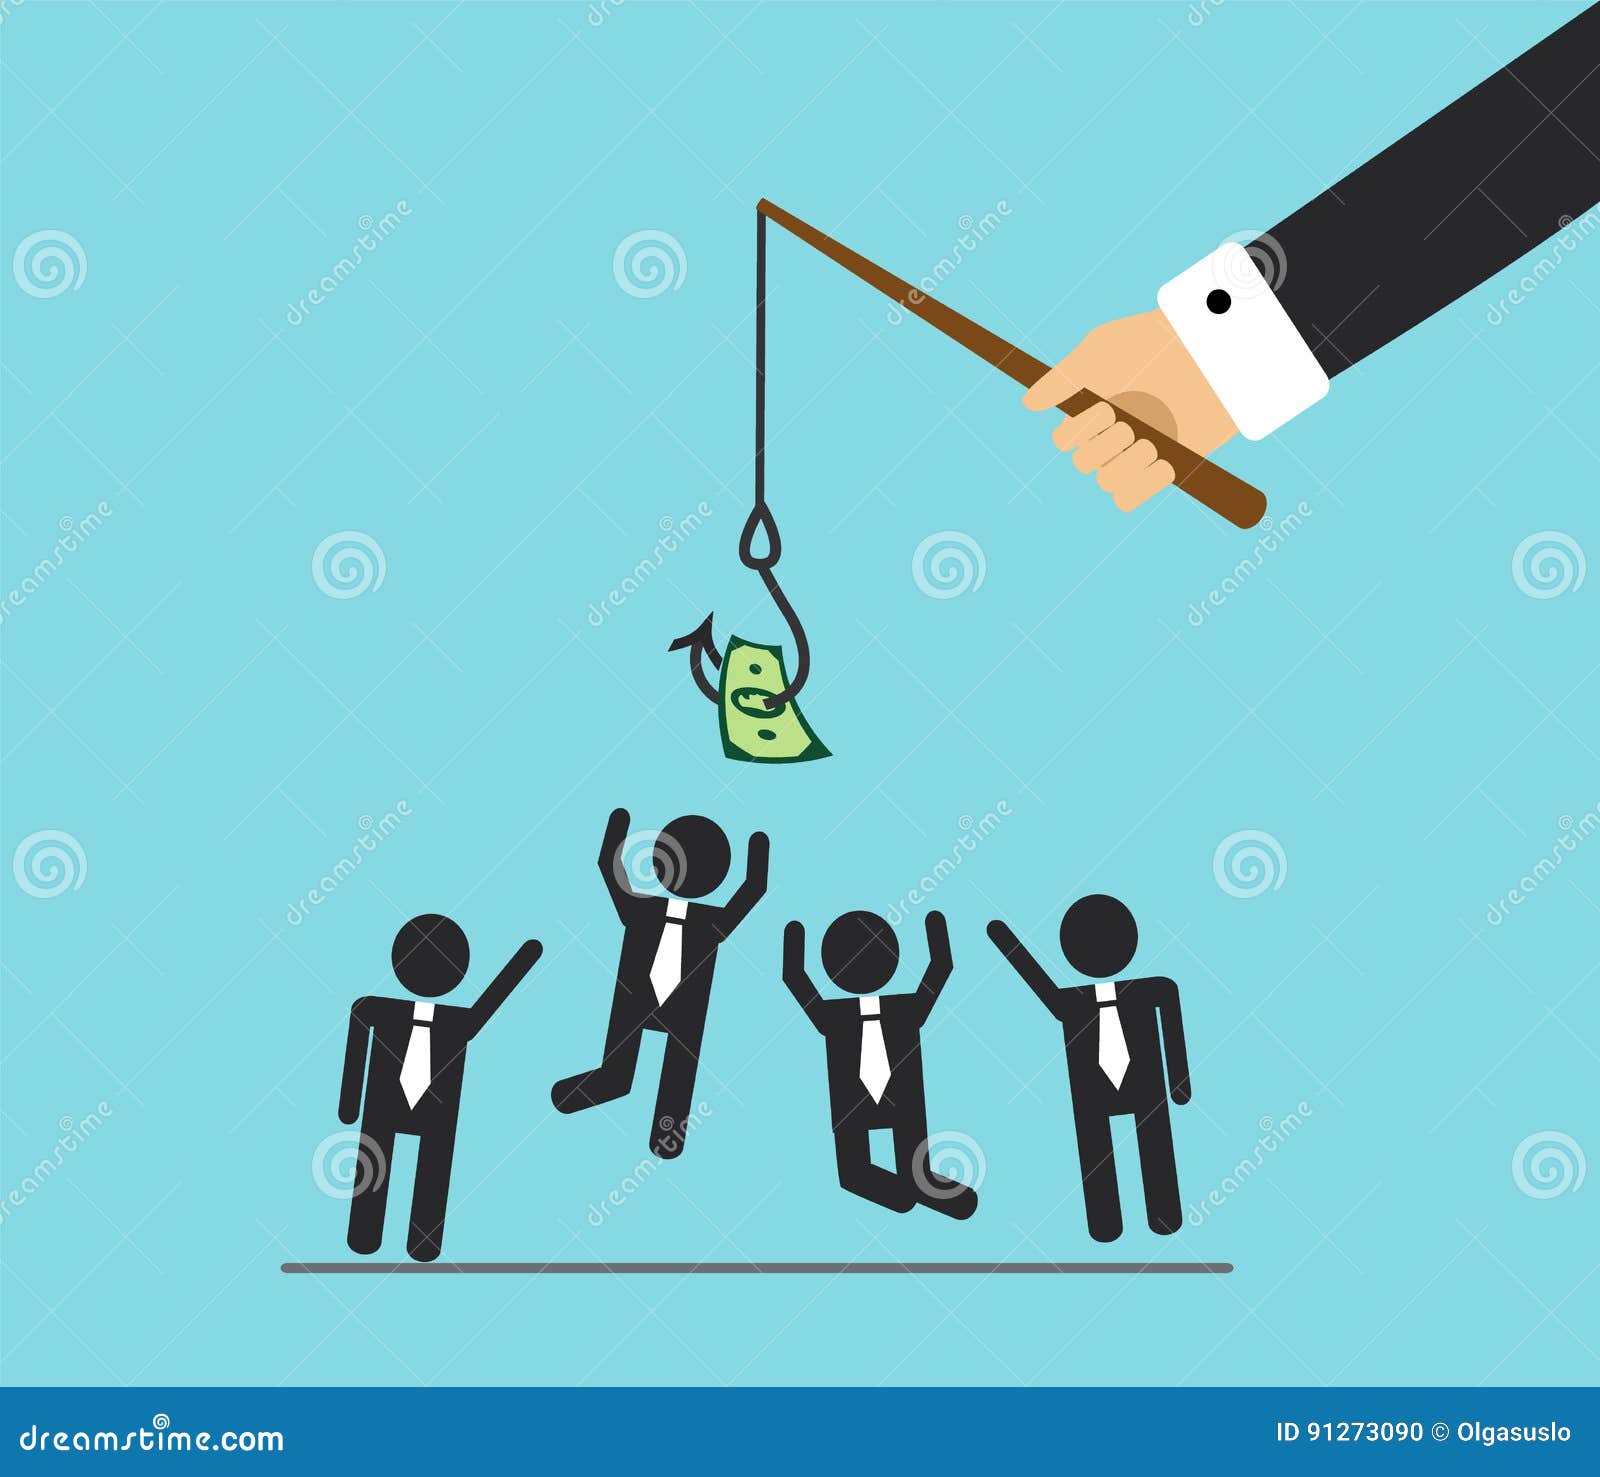 Money and Competition in the Office Stock Vector - Illustration of hanging,  hand: 91273090